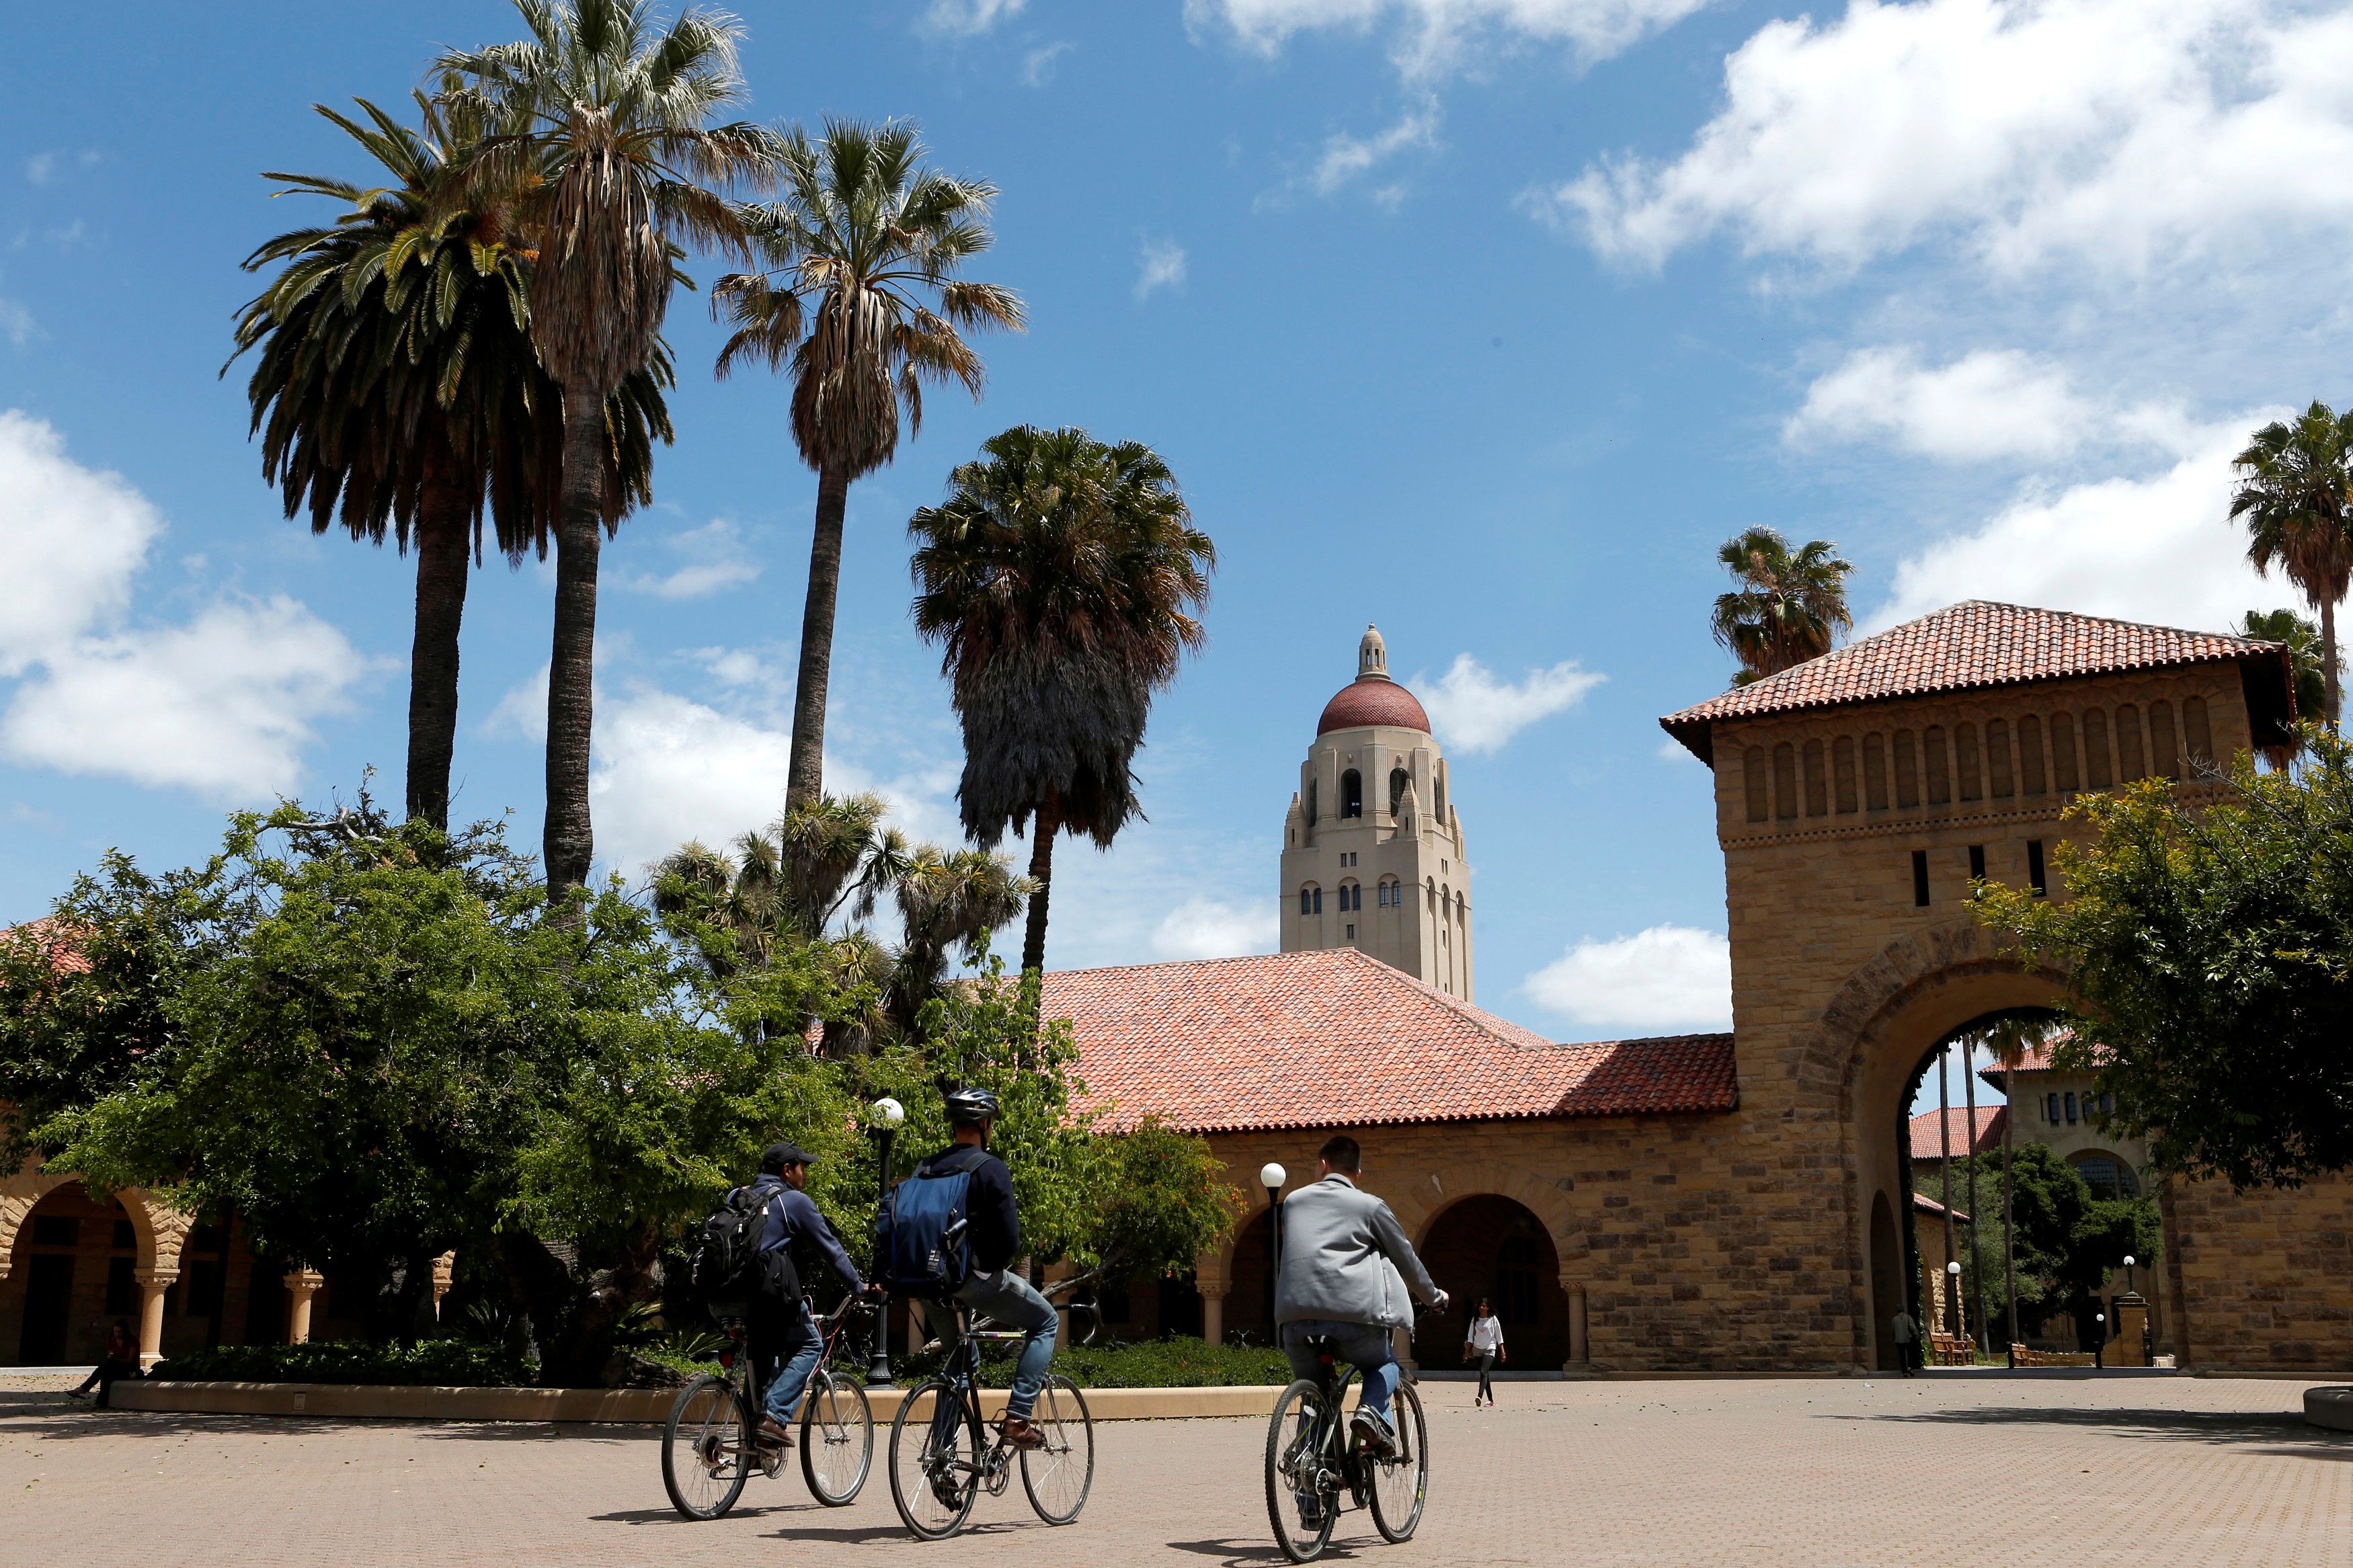 Cyclists traverse the main quad on Stanford University's campus in Stanford, California, U.S. on May 9, 2014.  REUTERS/Beck Diefenbach/File Photo